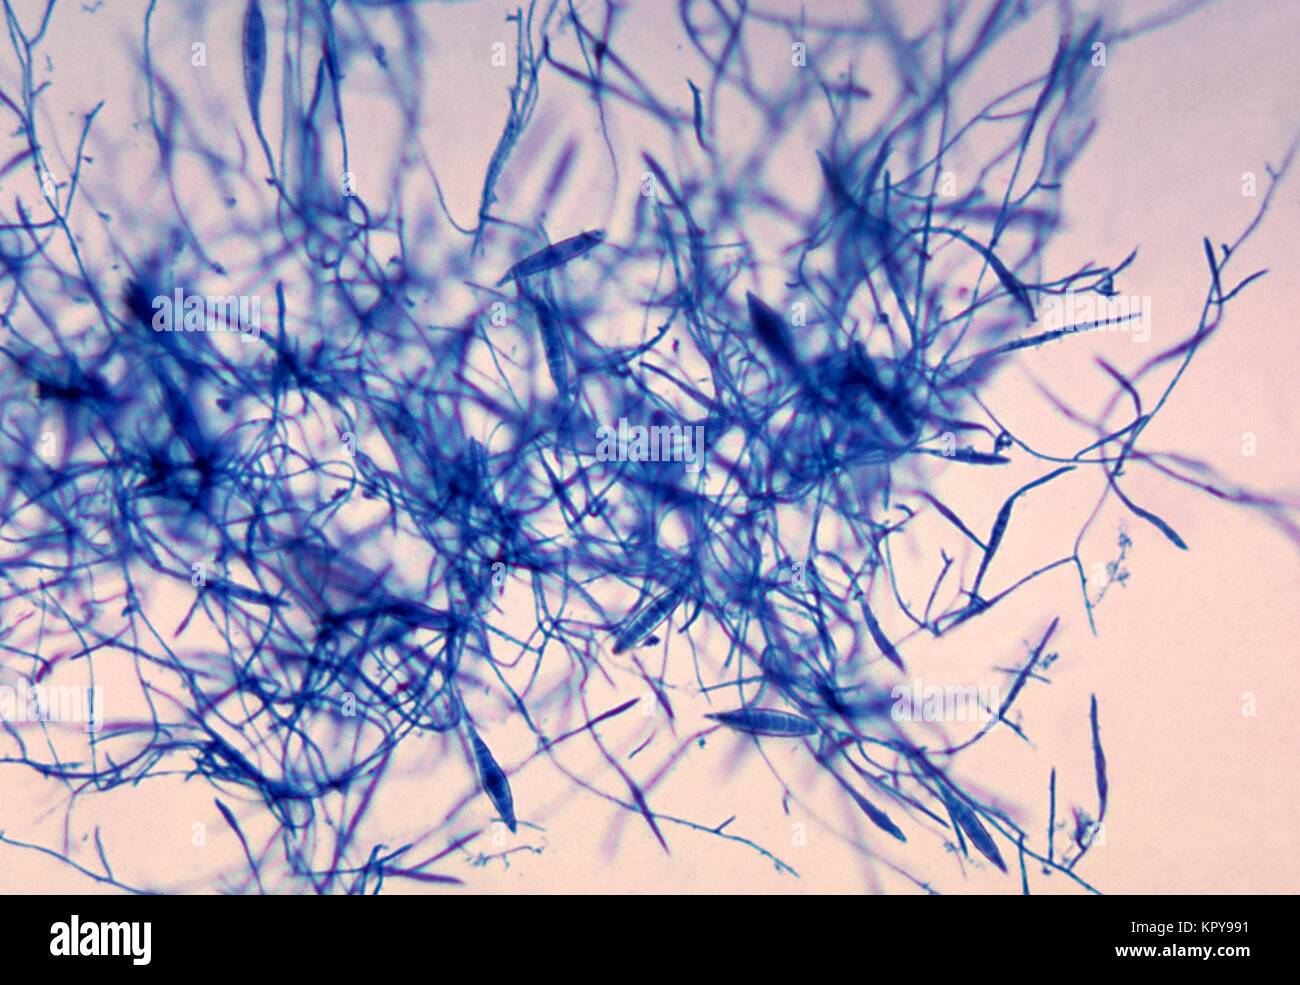 This is a photomicrograph of the fungus Microsporum canis using the  lactophenol cotton blue staining technique. M. canis, a zoophilic  dermatophyte often found in cats and dogs, is a common cause of